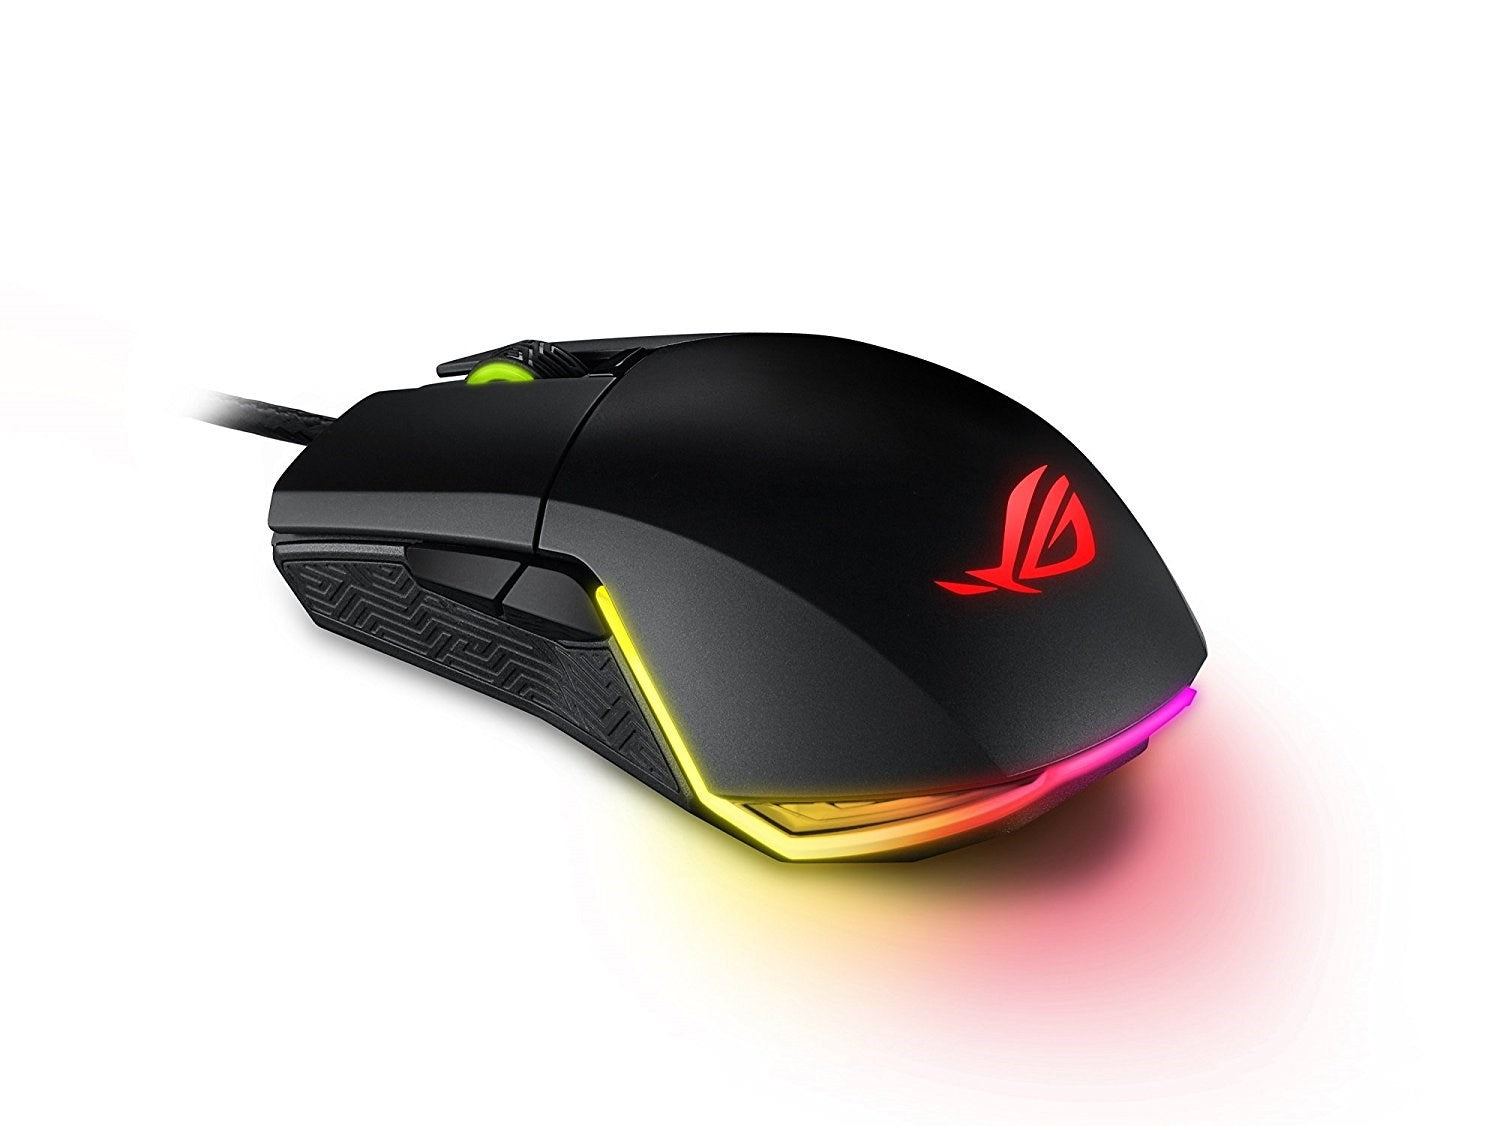 ASUS ROG Pugio Optical Gaming Mouse